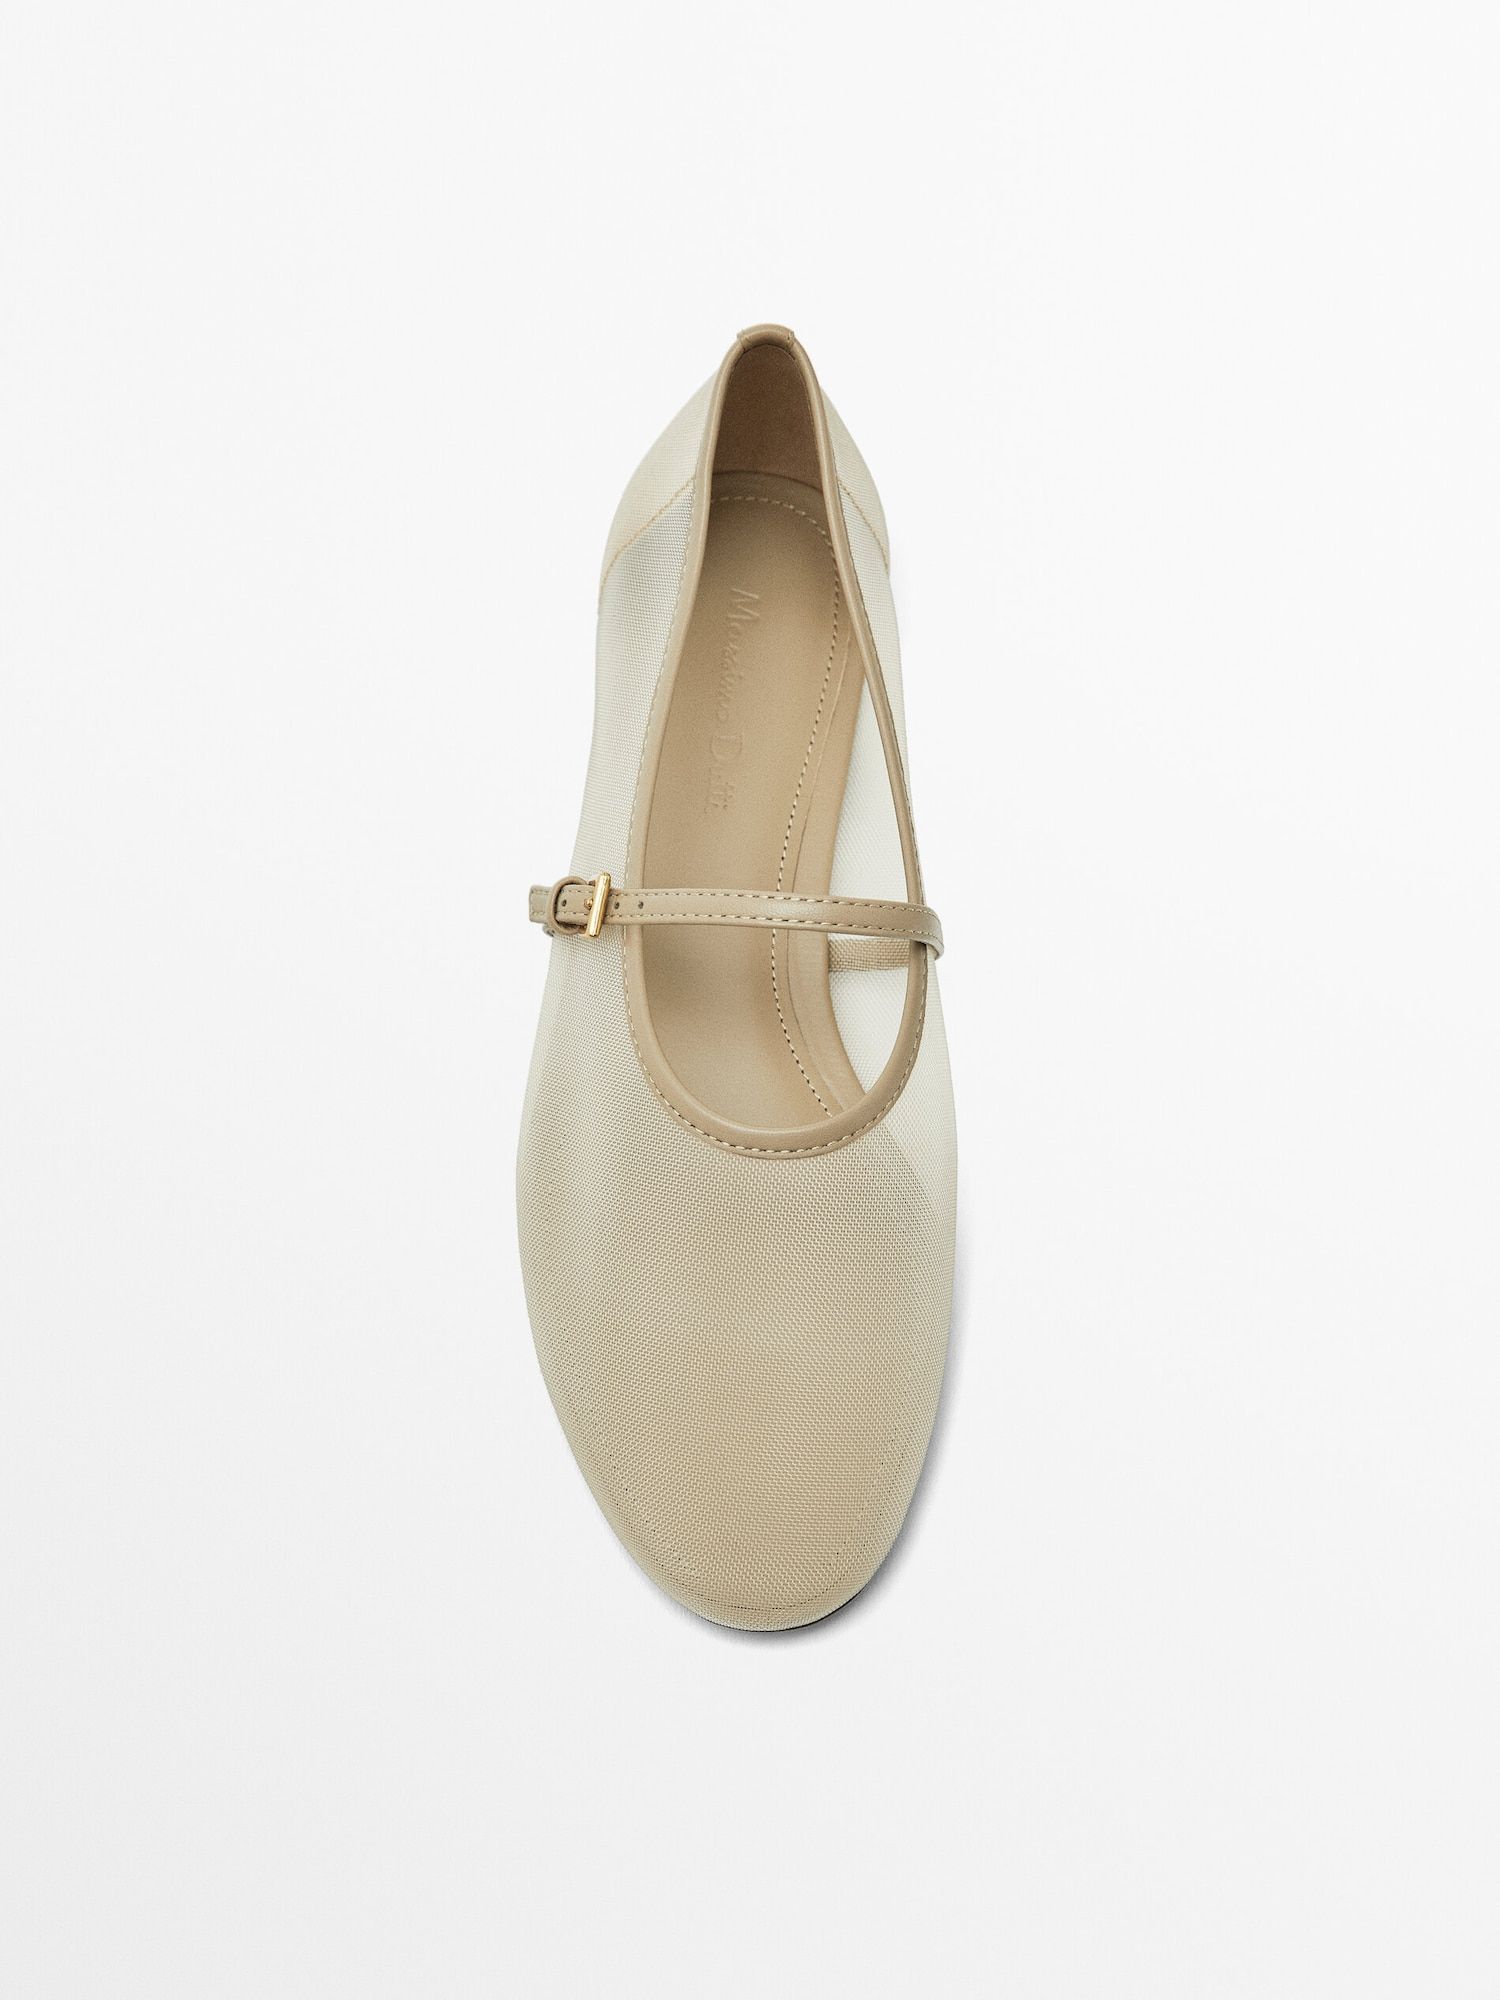 Mesh ballet flats with strap across the instep | Massimo Dutti (US)